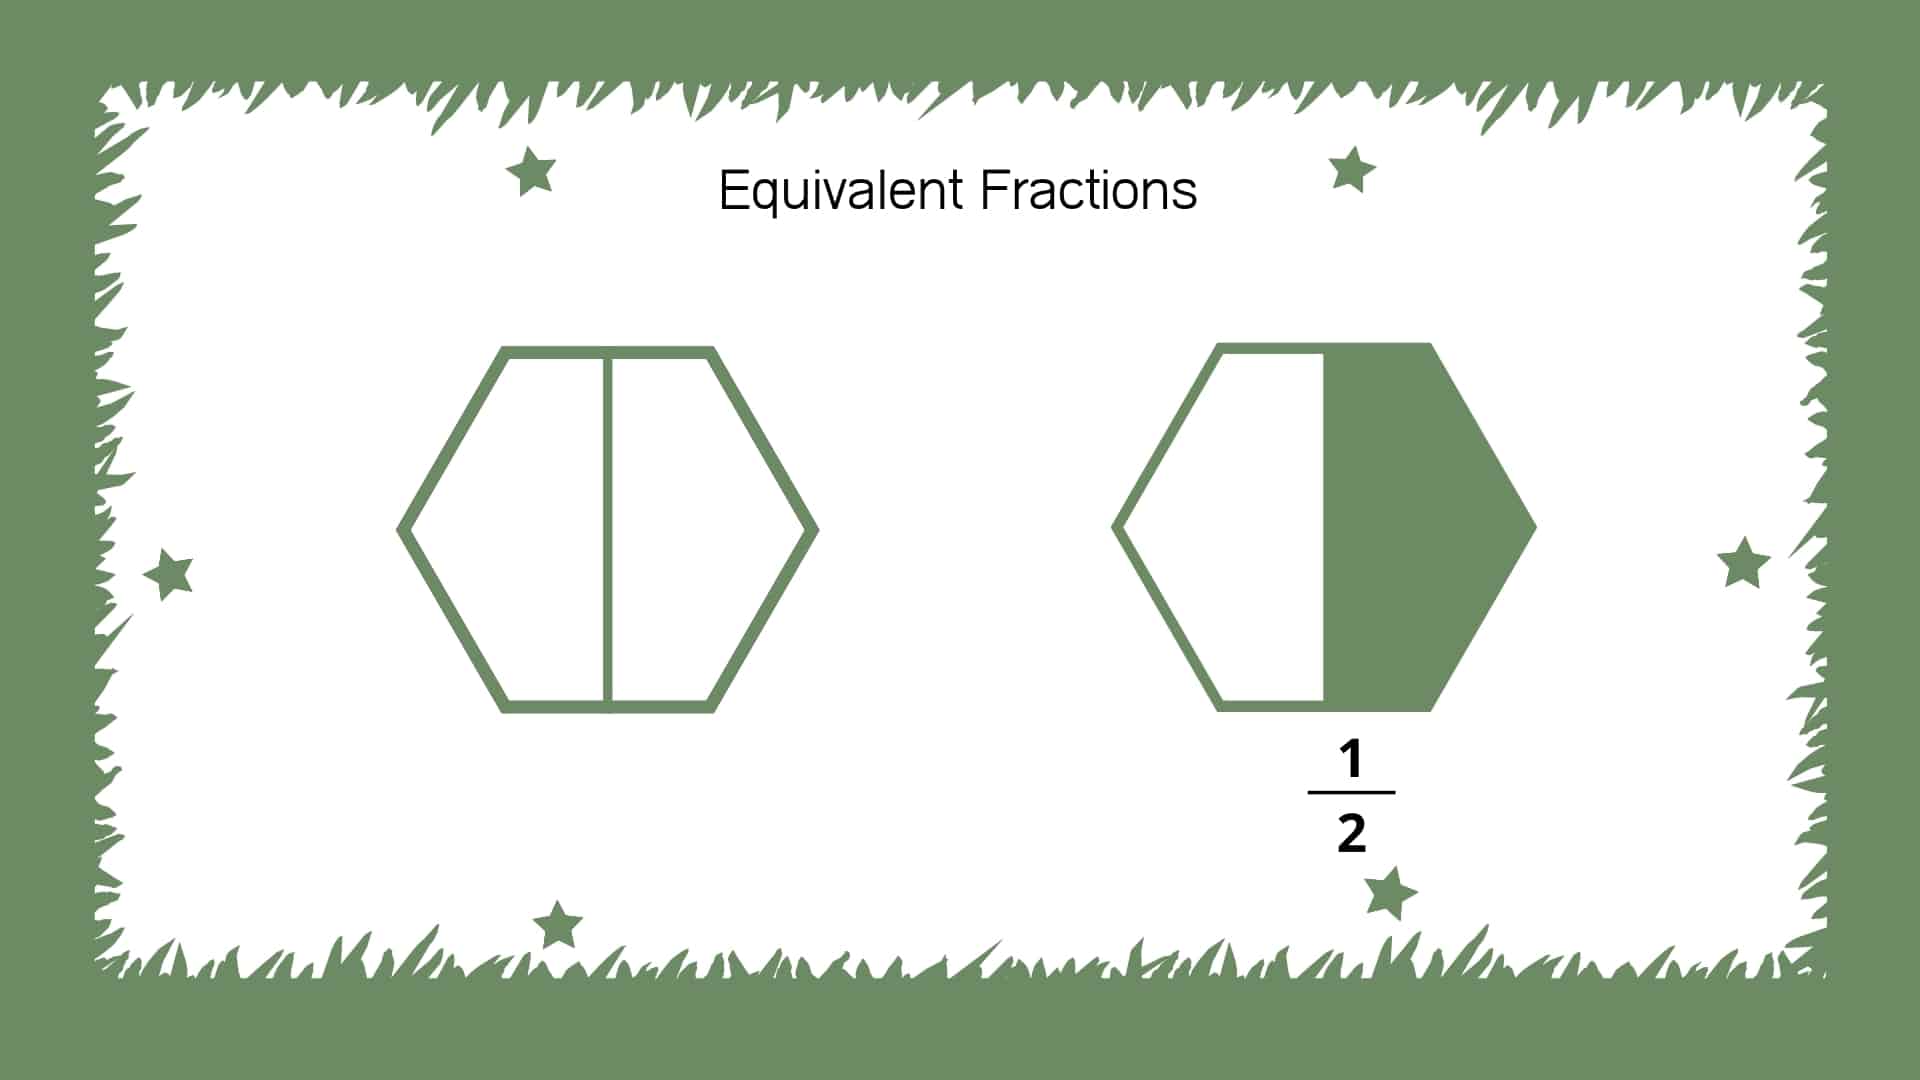 representation of fraction half to represent equivalent fraction game printable